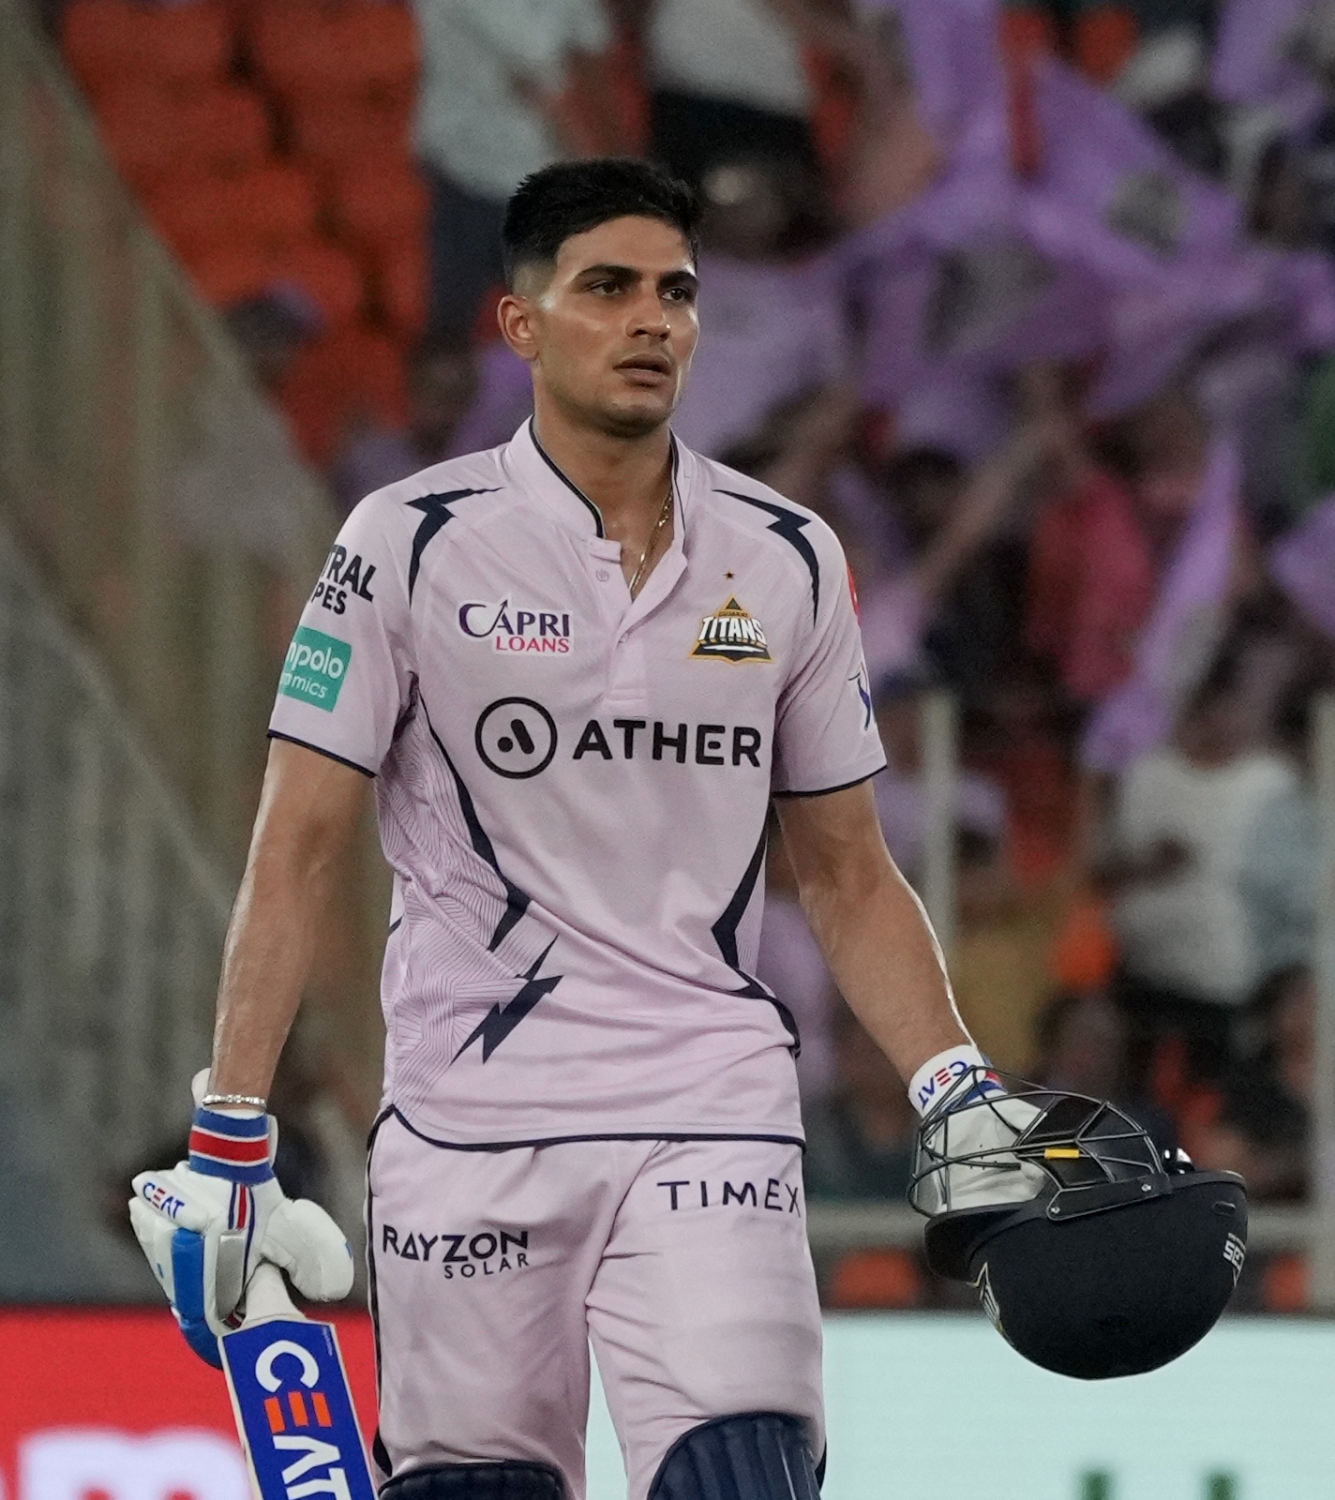 IPL 2023: Shubman Gill and Yashasvi Jaiswal are the two next big things of Indian cricket, says Robin Uthappa